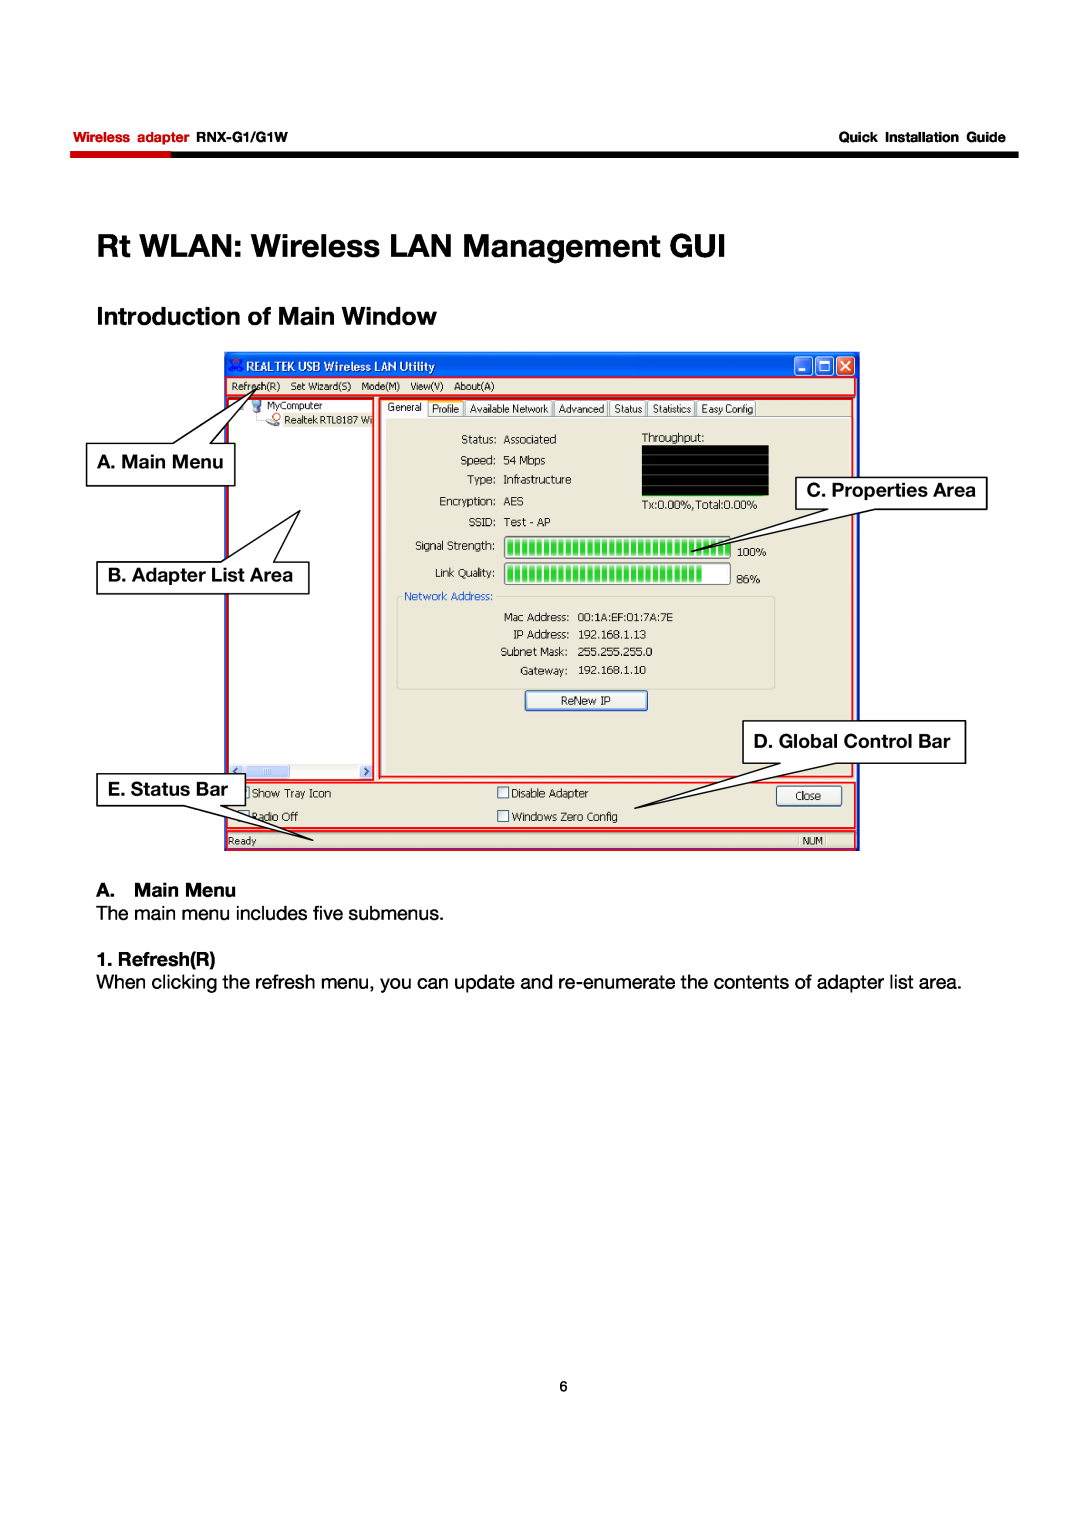 Rosewill RNX-G1/G1W Rt WLAN Wireless LAN Management GUI, Introduction of Main Window, The main menu includes five submenus 